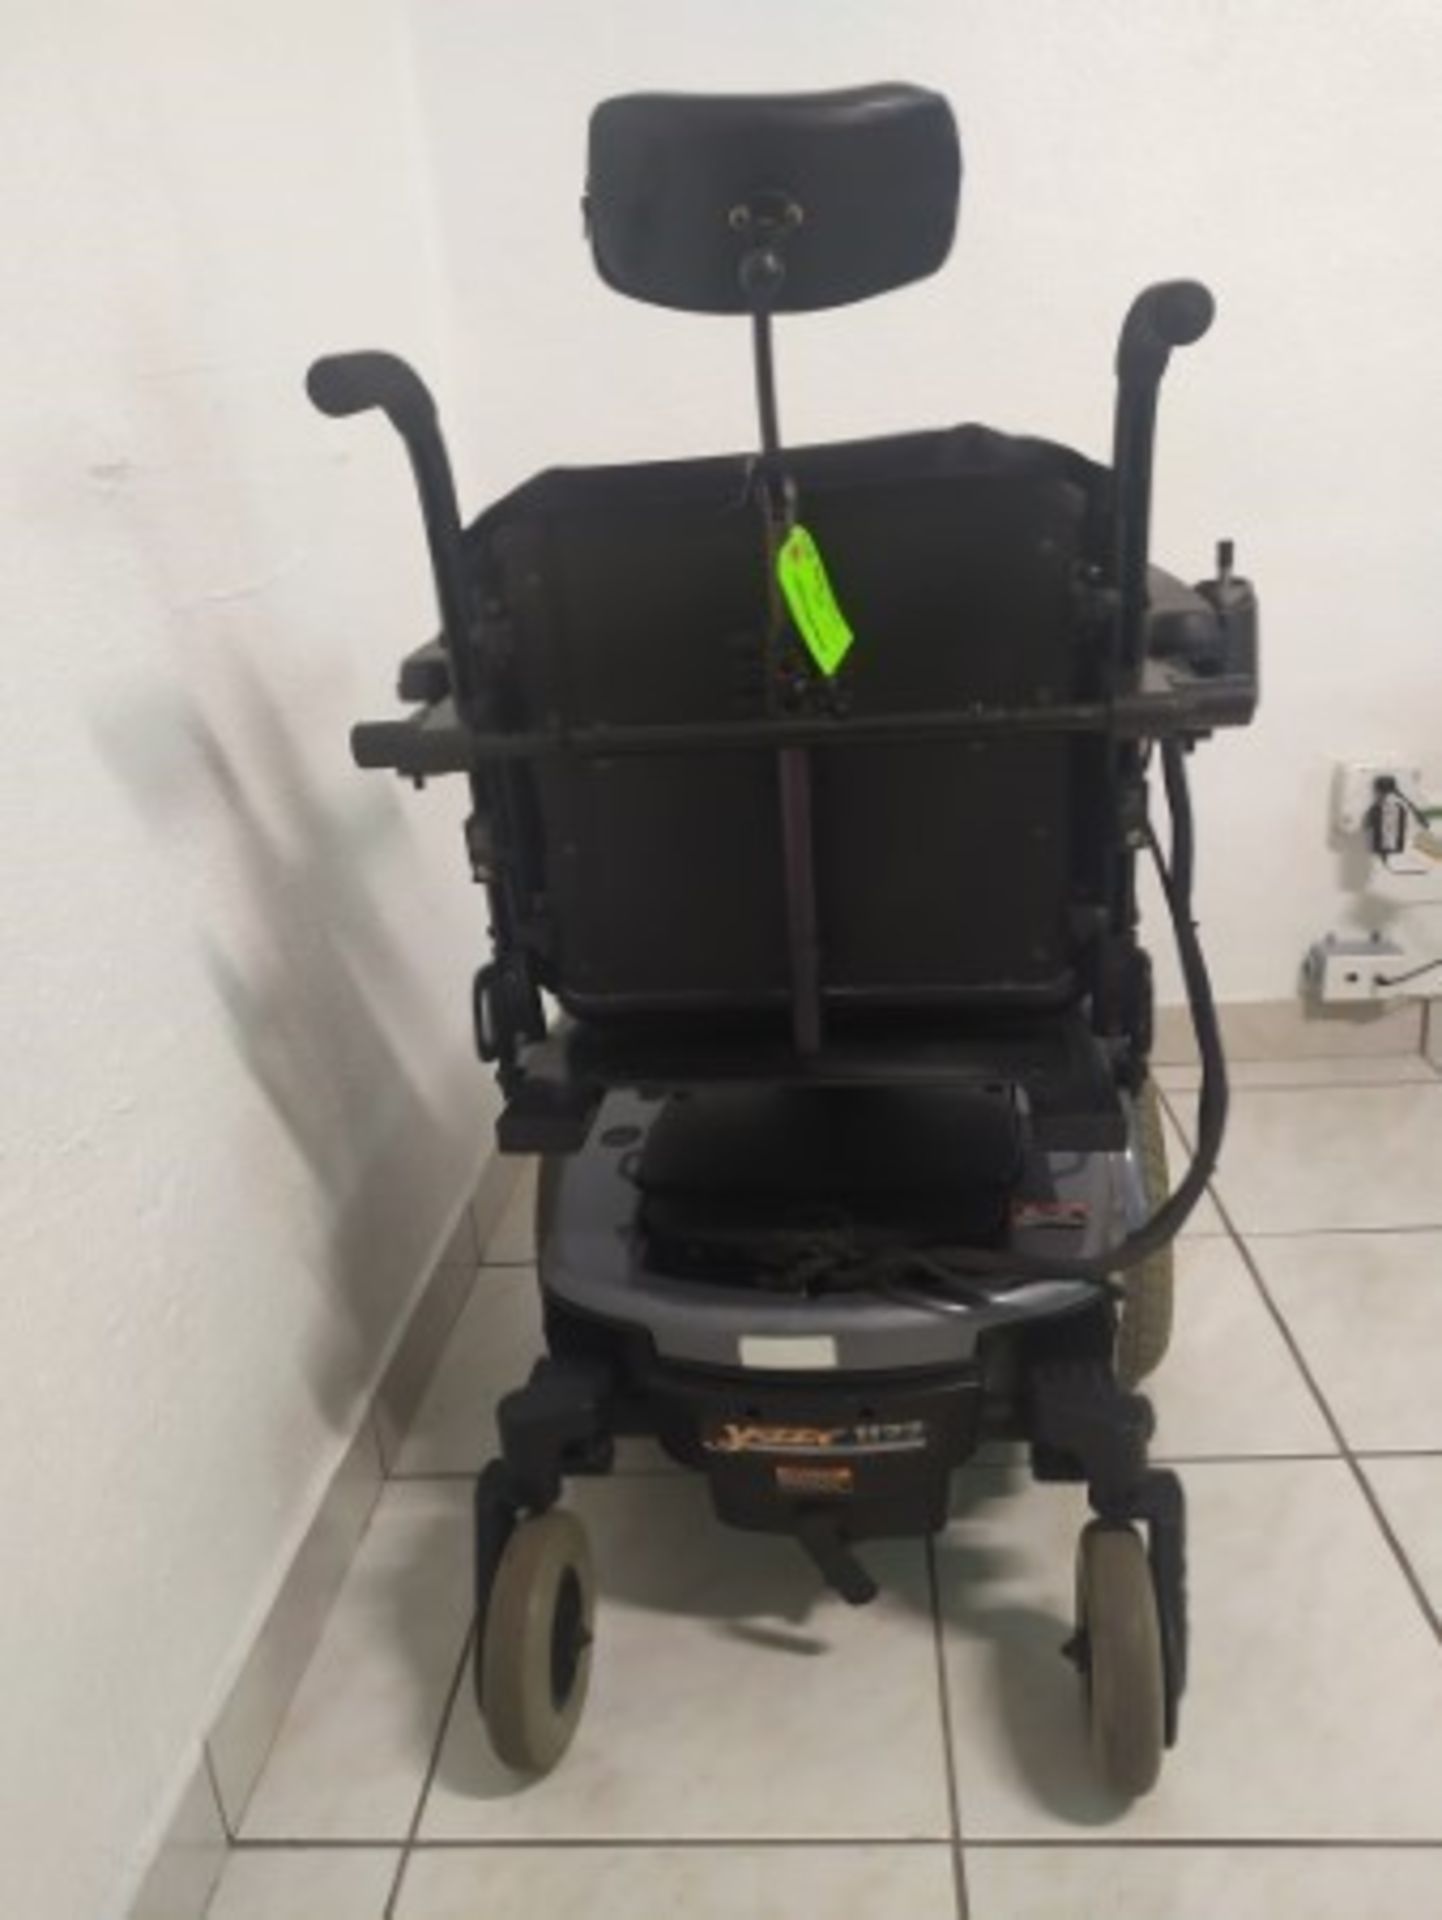 2008 PRIDE JAZZY 1122 6-WHEEL REHAB POWER CHAIR WITH SEAT WITH RAISE & LOWER FEATURES - GRAY - 300LB - Image 4 of 5